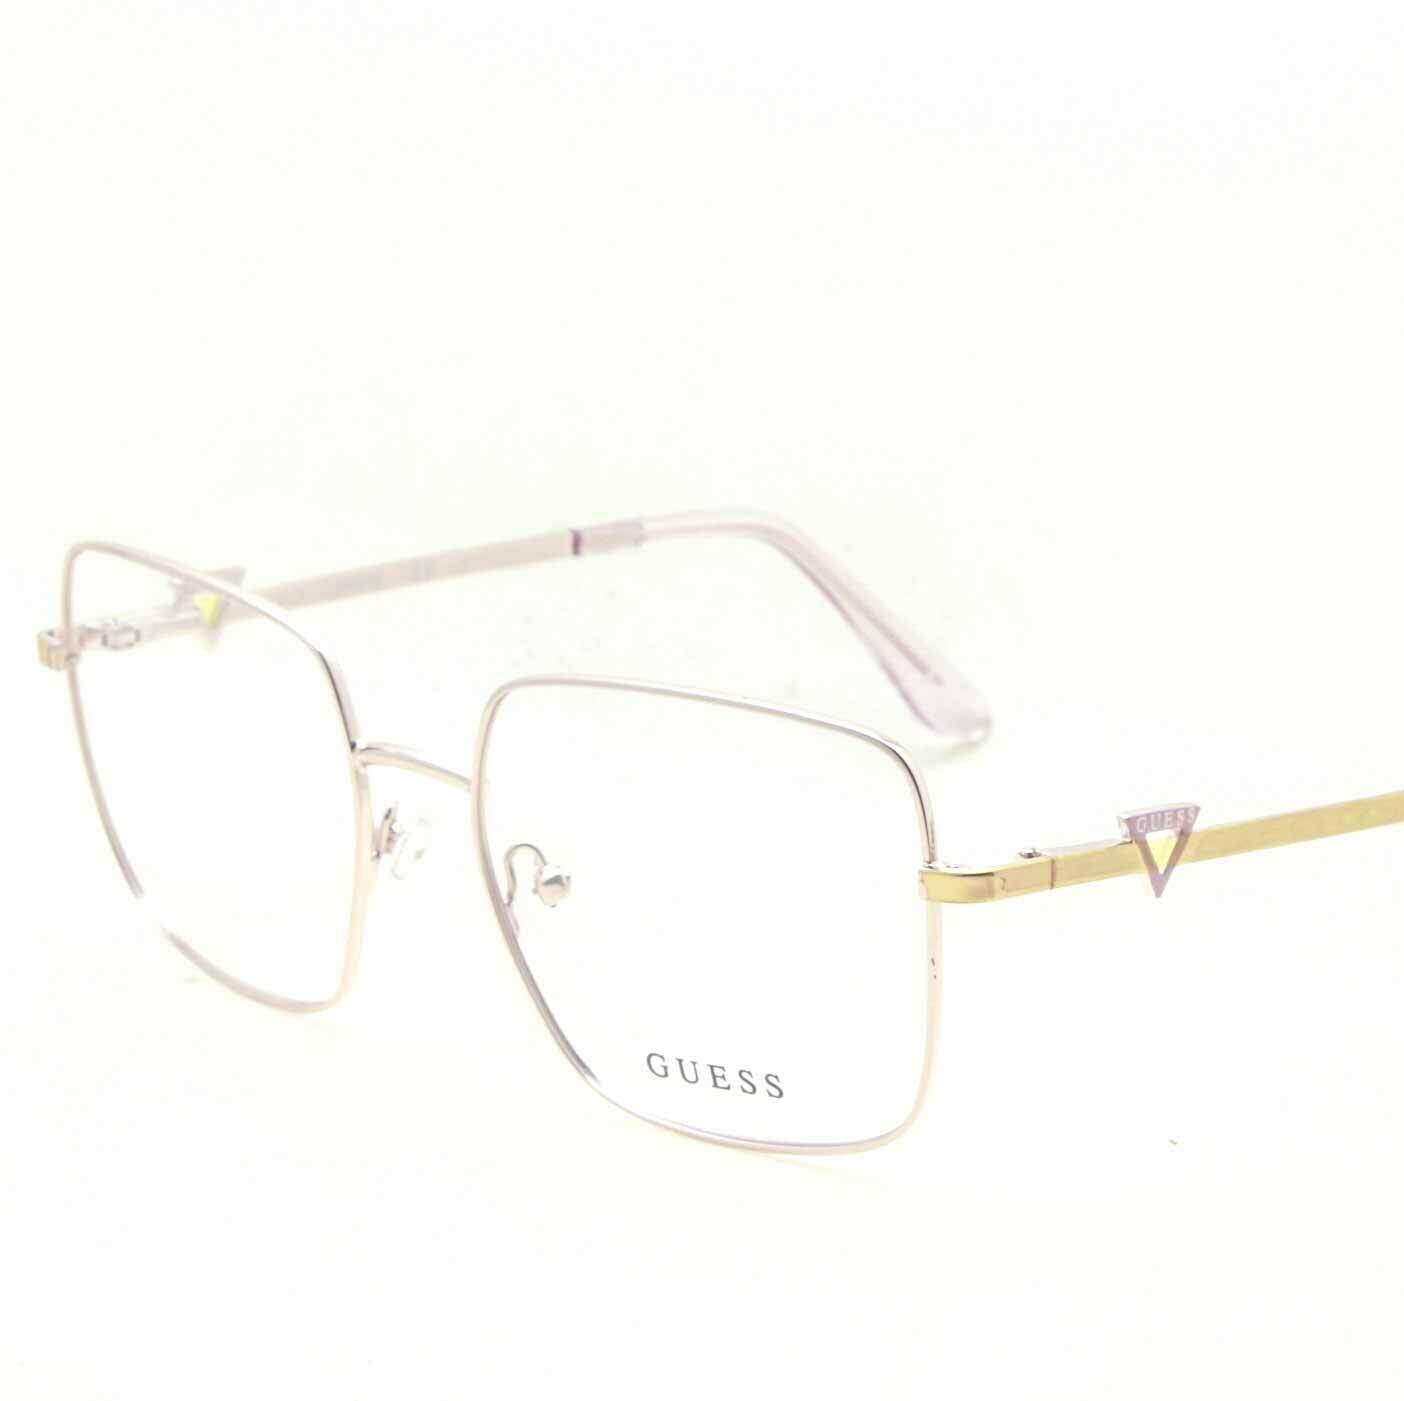 GUESS 0120